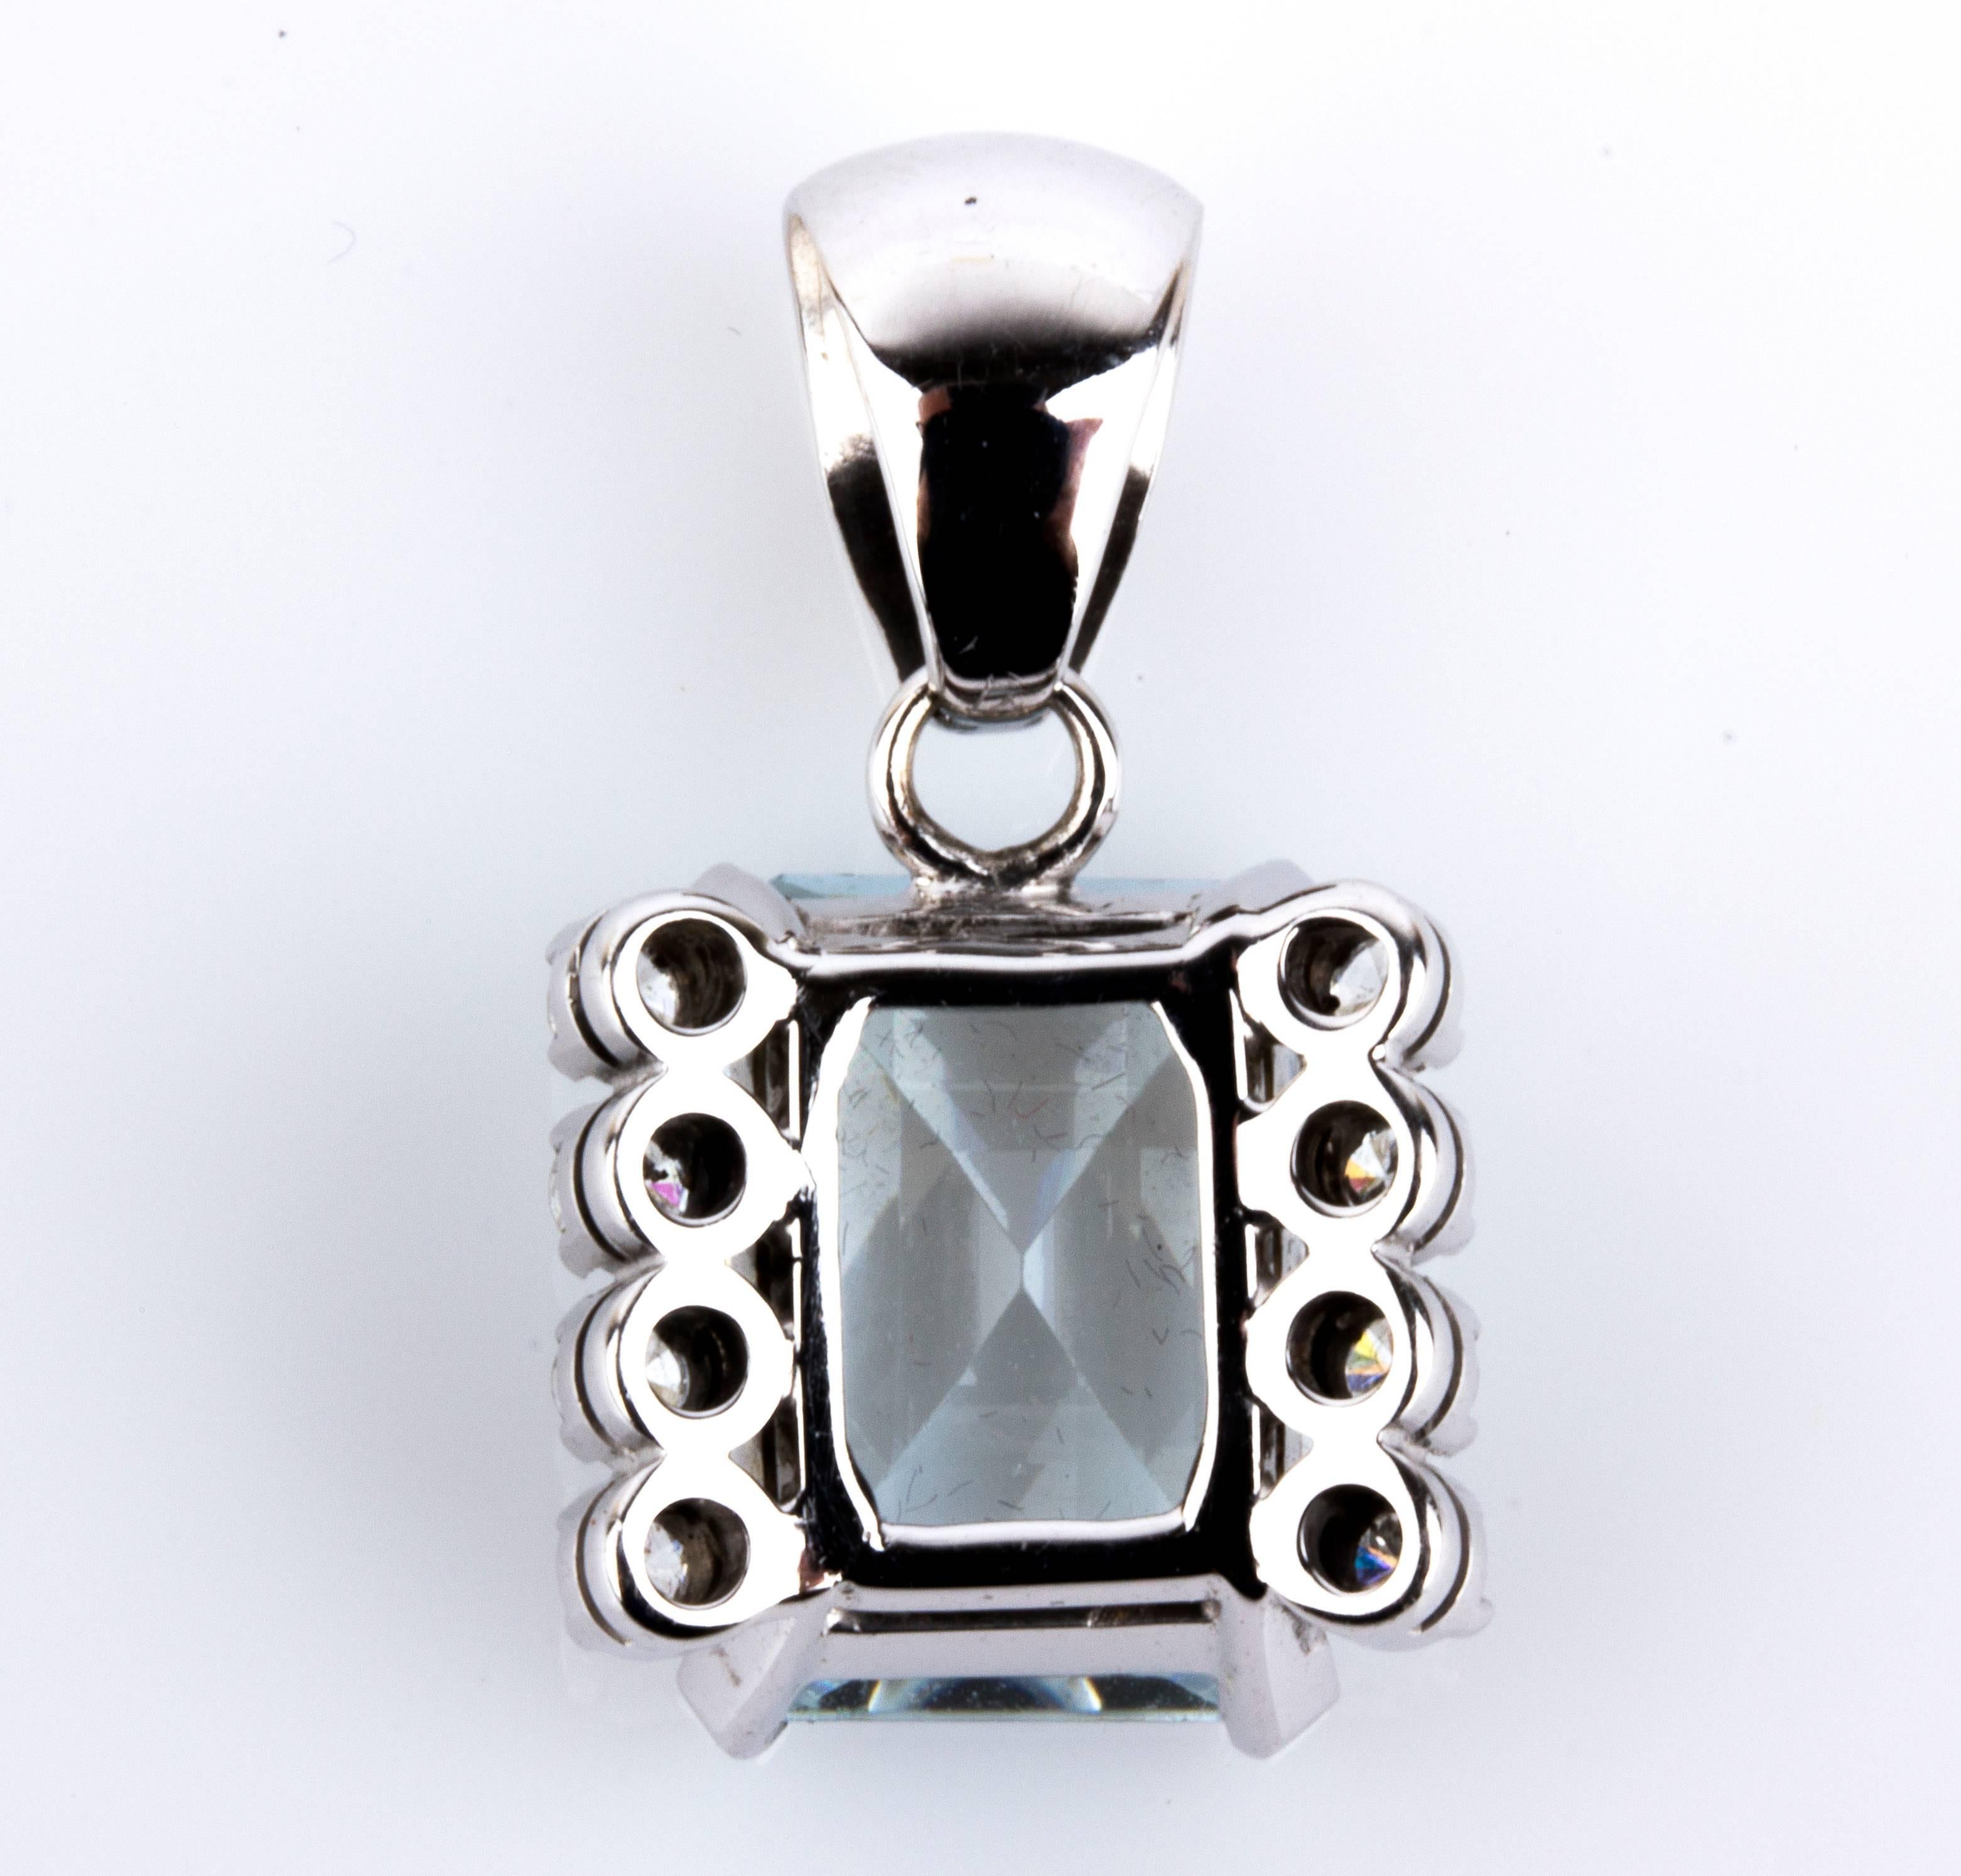 Embellished with step-cut aquamarine flanked by two rows of three diamonds. Weight 5.75 gr. 